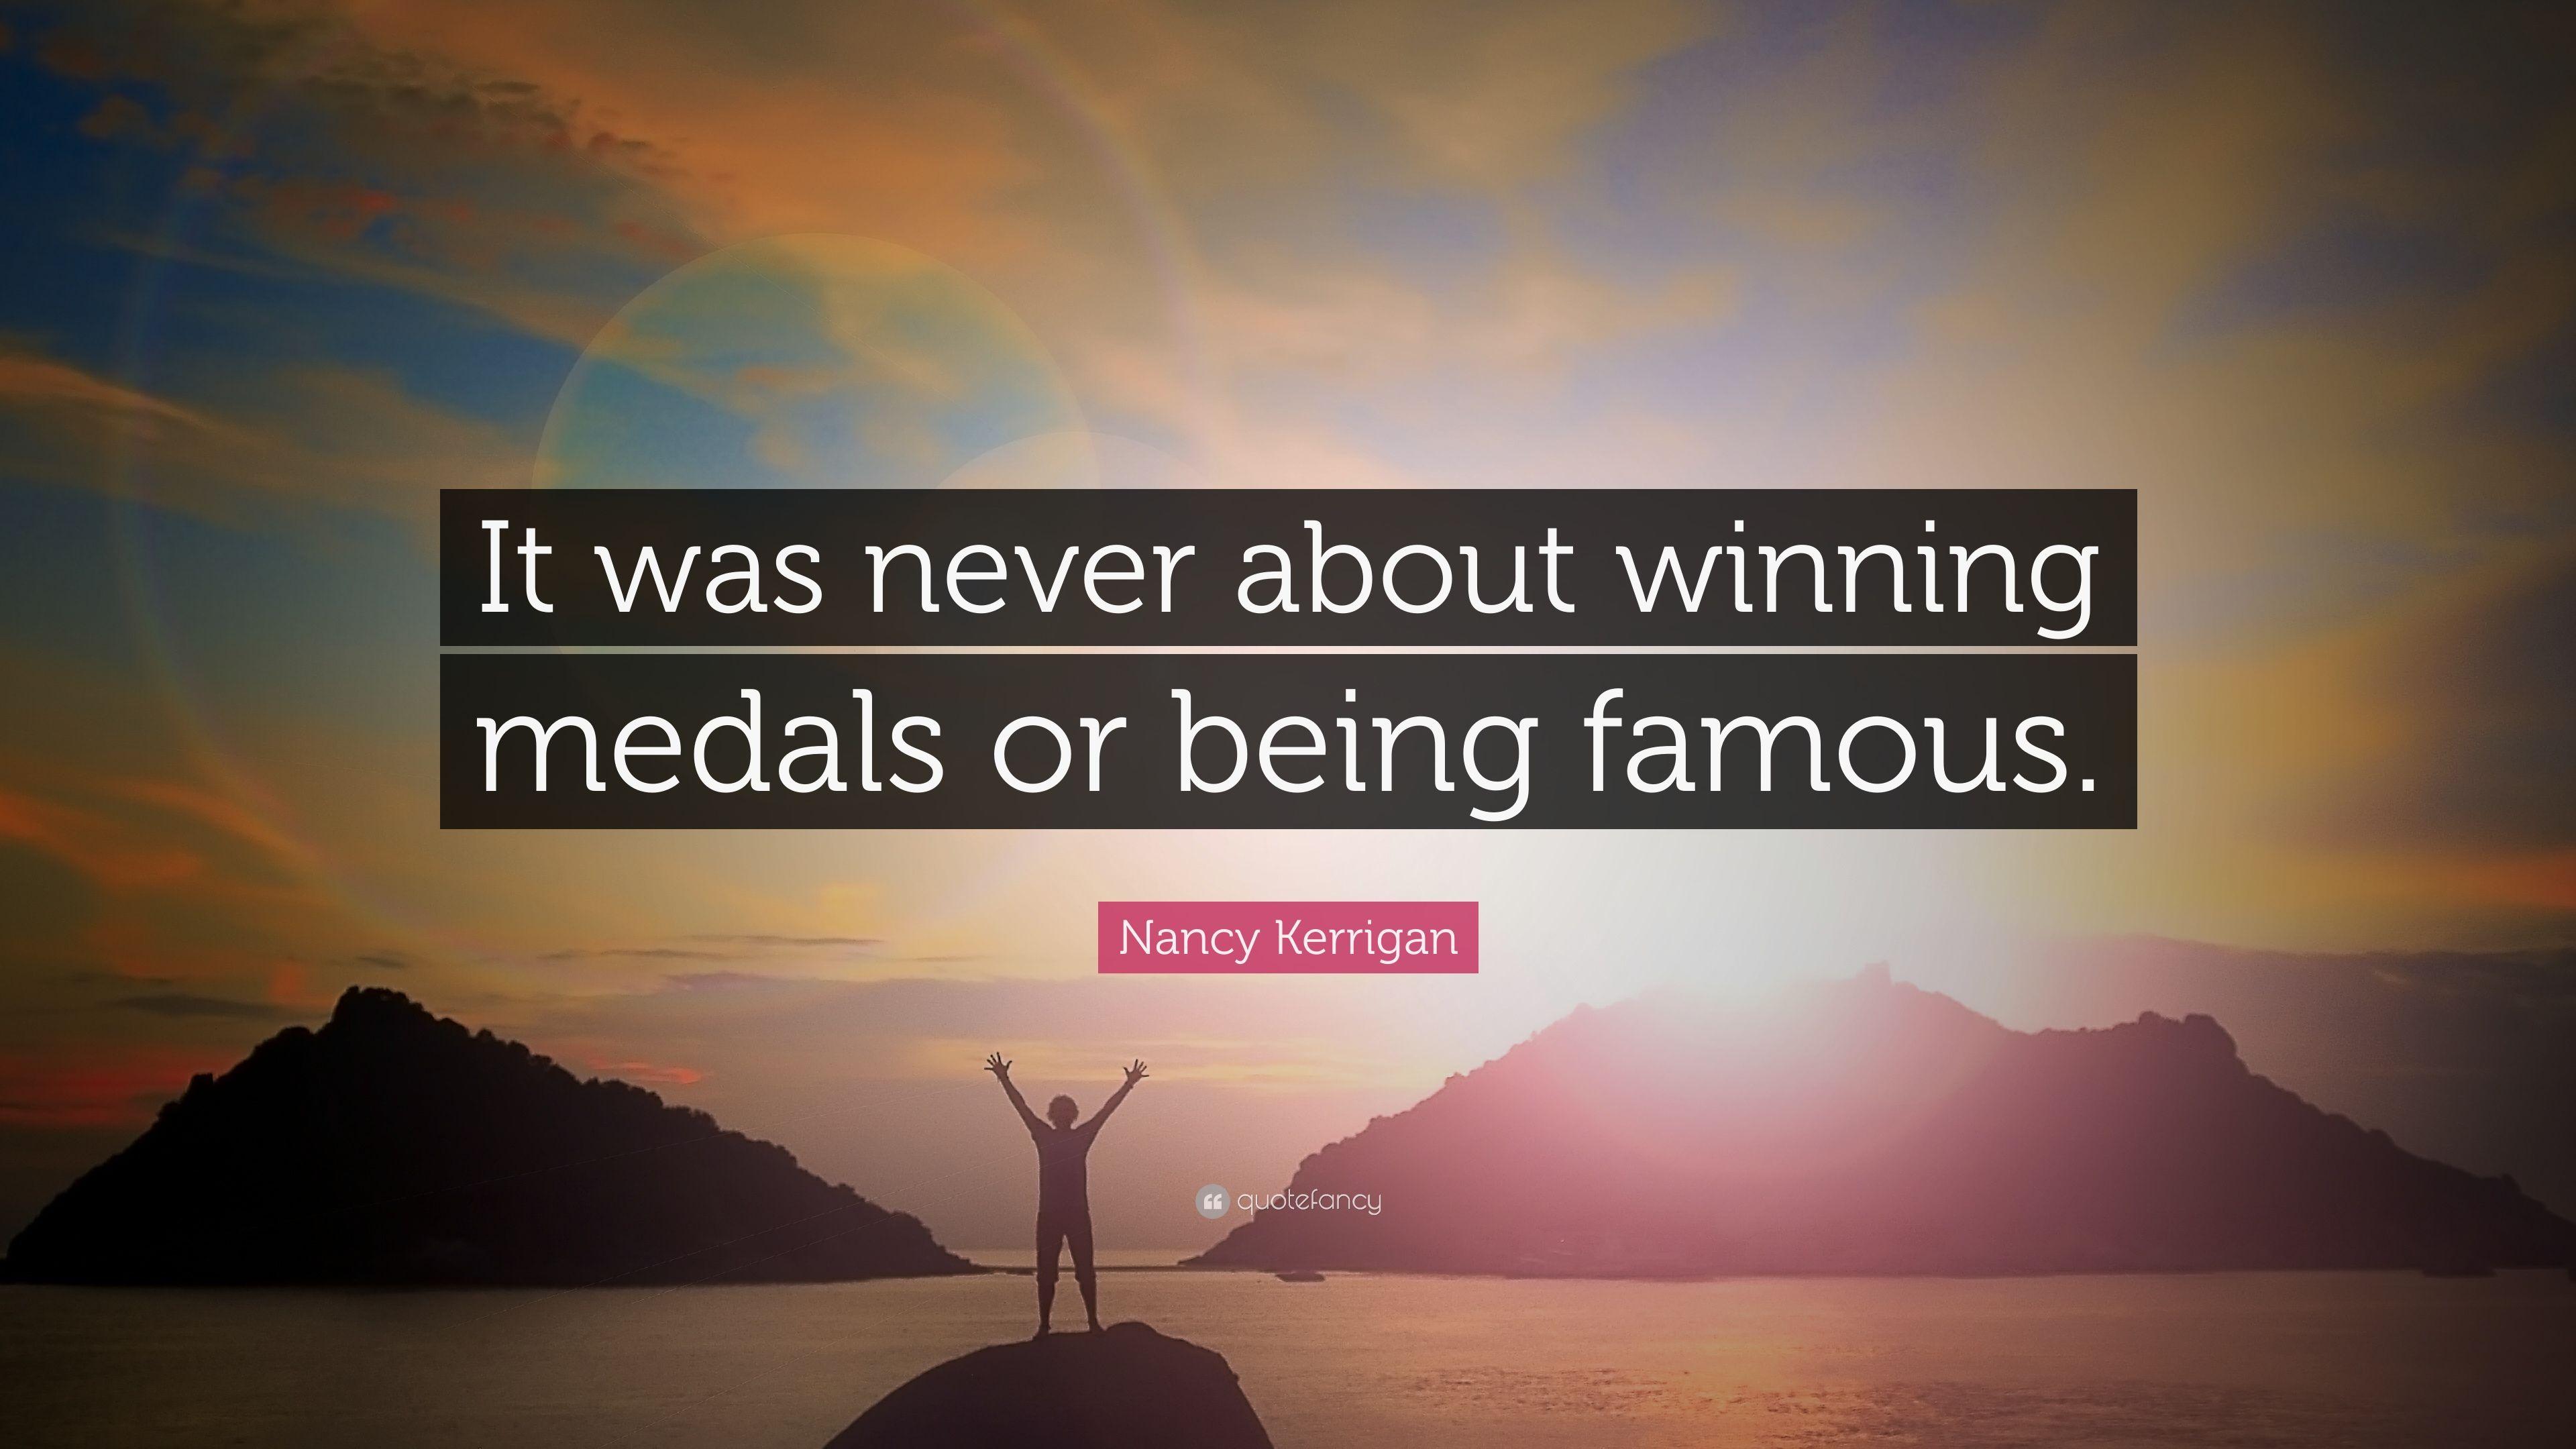 Nancy Kerrigan Quote: “It was never about winning medals or being